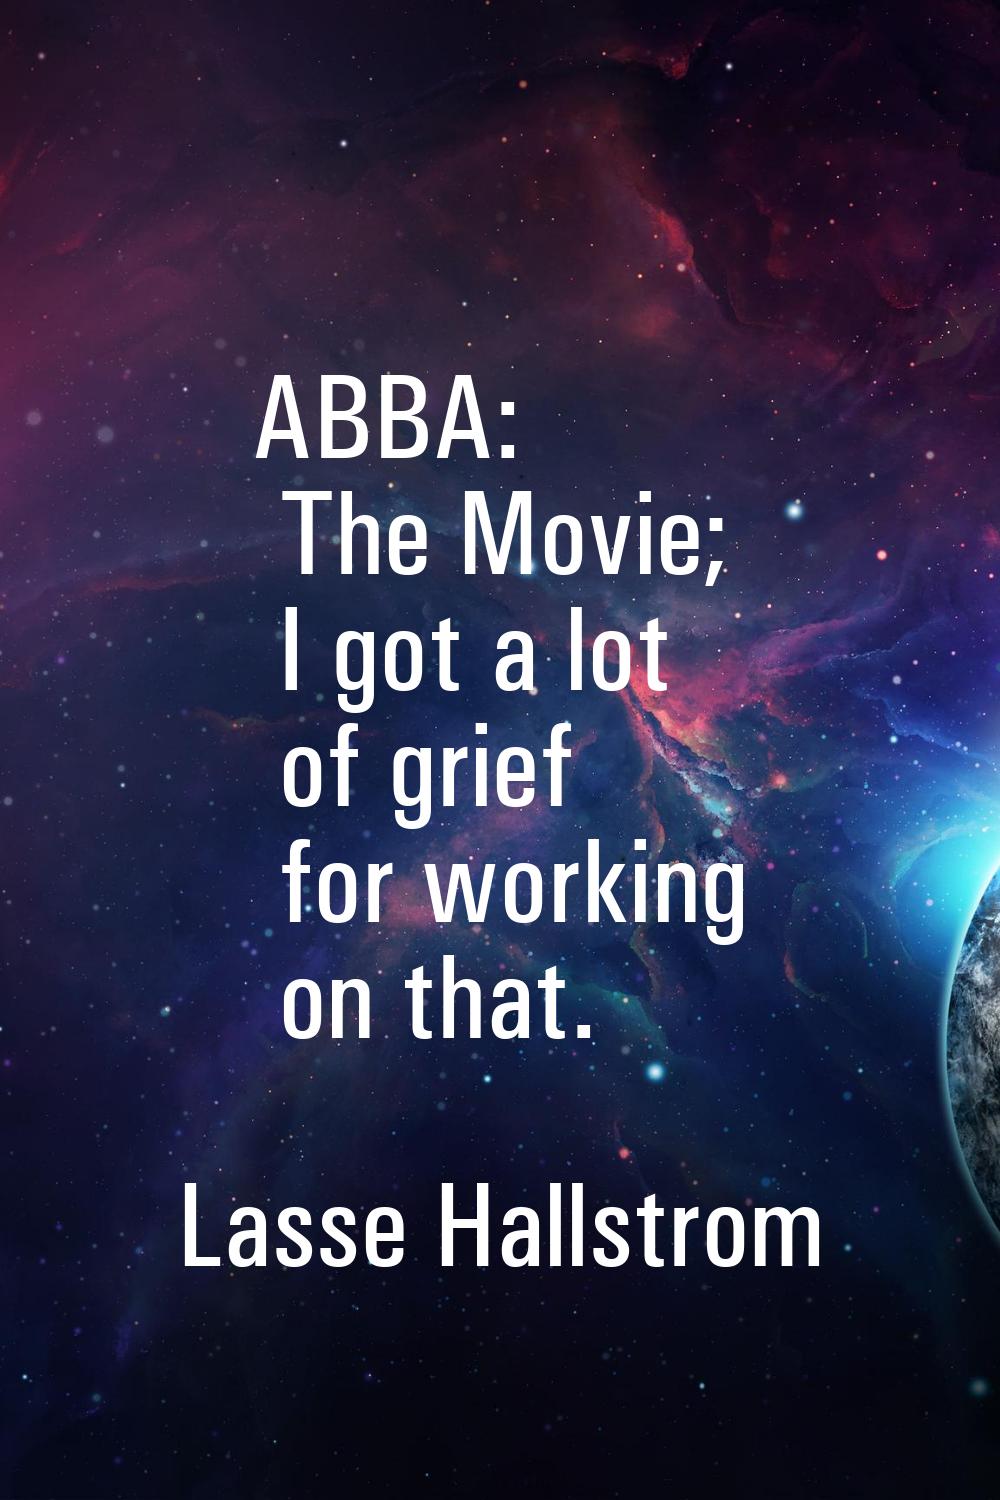 ABBA: The Movie; I got a lot of grief for working on that.